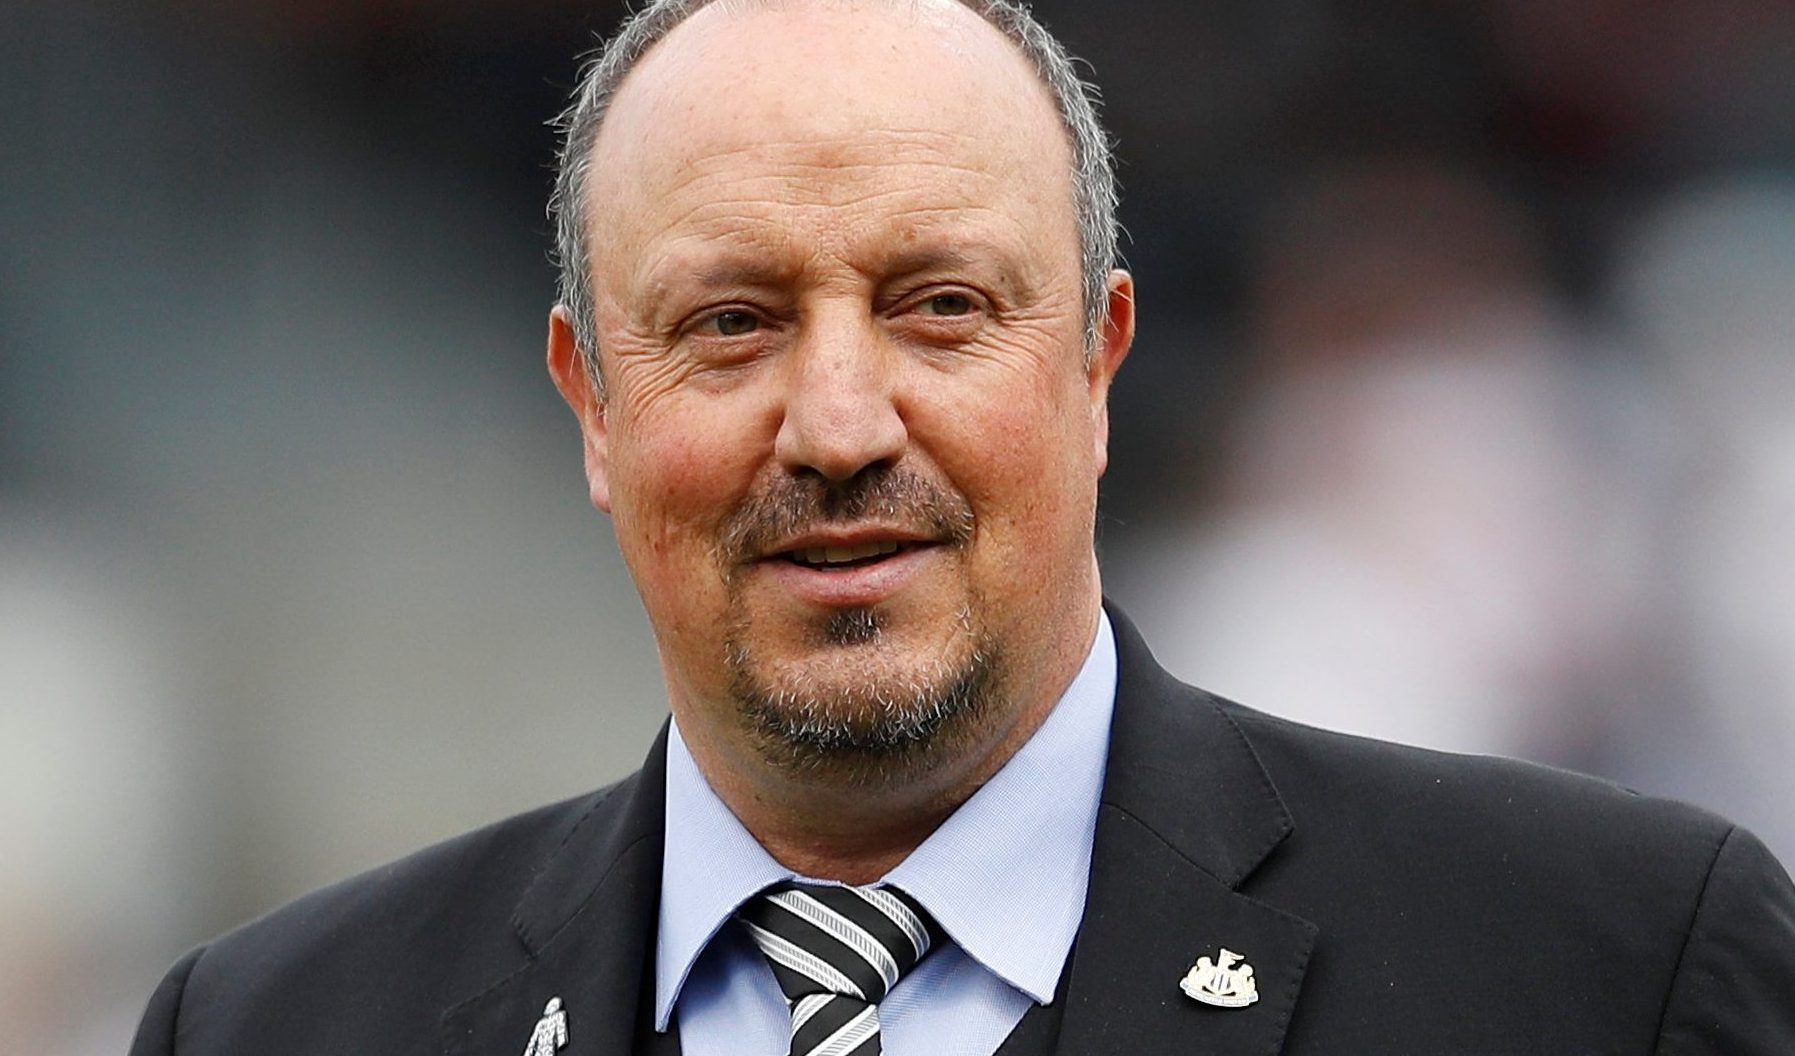 Soccer Football - Premier League - Fulham v Newcastle United - Craven Cottage, London, Britain - May 12, 2019  Newcastle United manager Rafael Benitez before the match   REUTERS/Peter Nicholls  EDITORIAL USE ONLY. No use with unauthorized audio, video, data, fixture lists, club/league logos or 